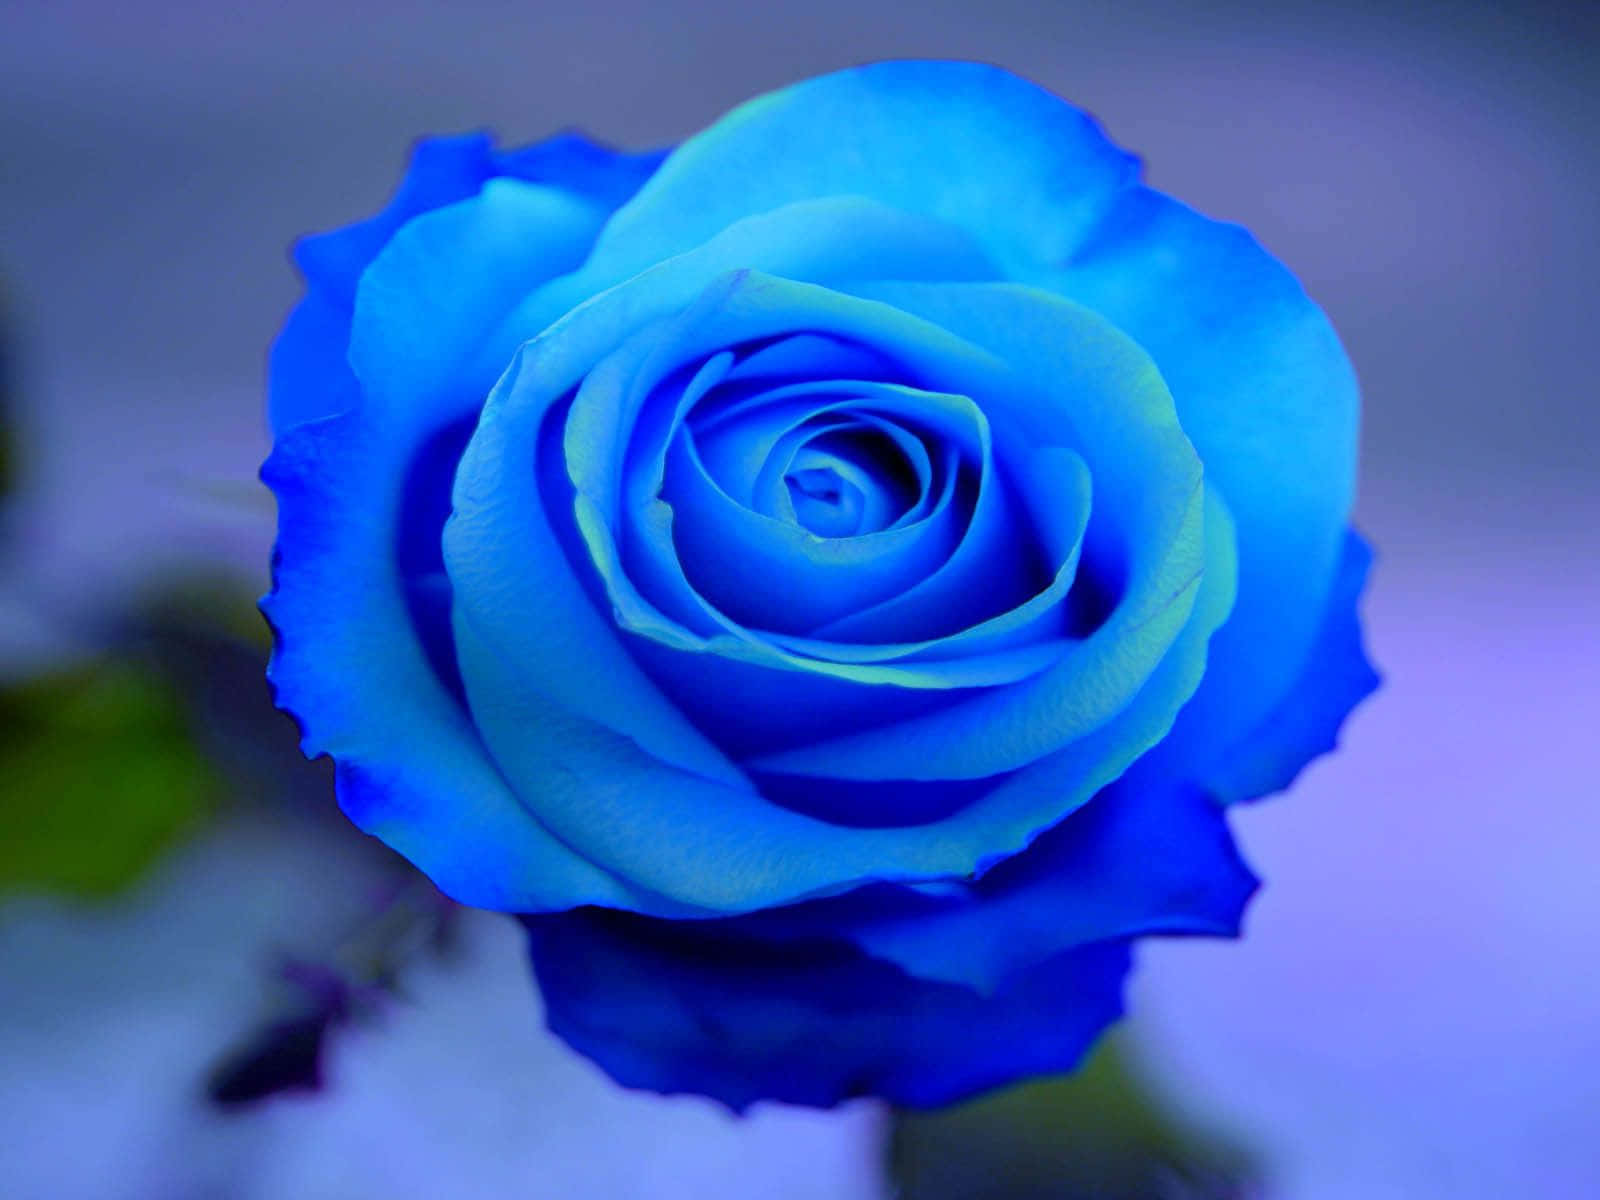 A Stunning Blue Petaled Rose Surrounded By A Soft Black Background. Background